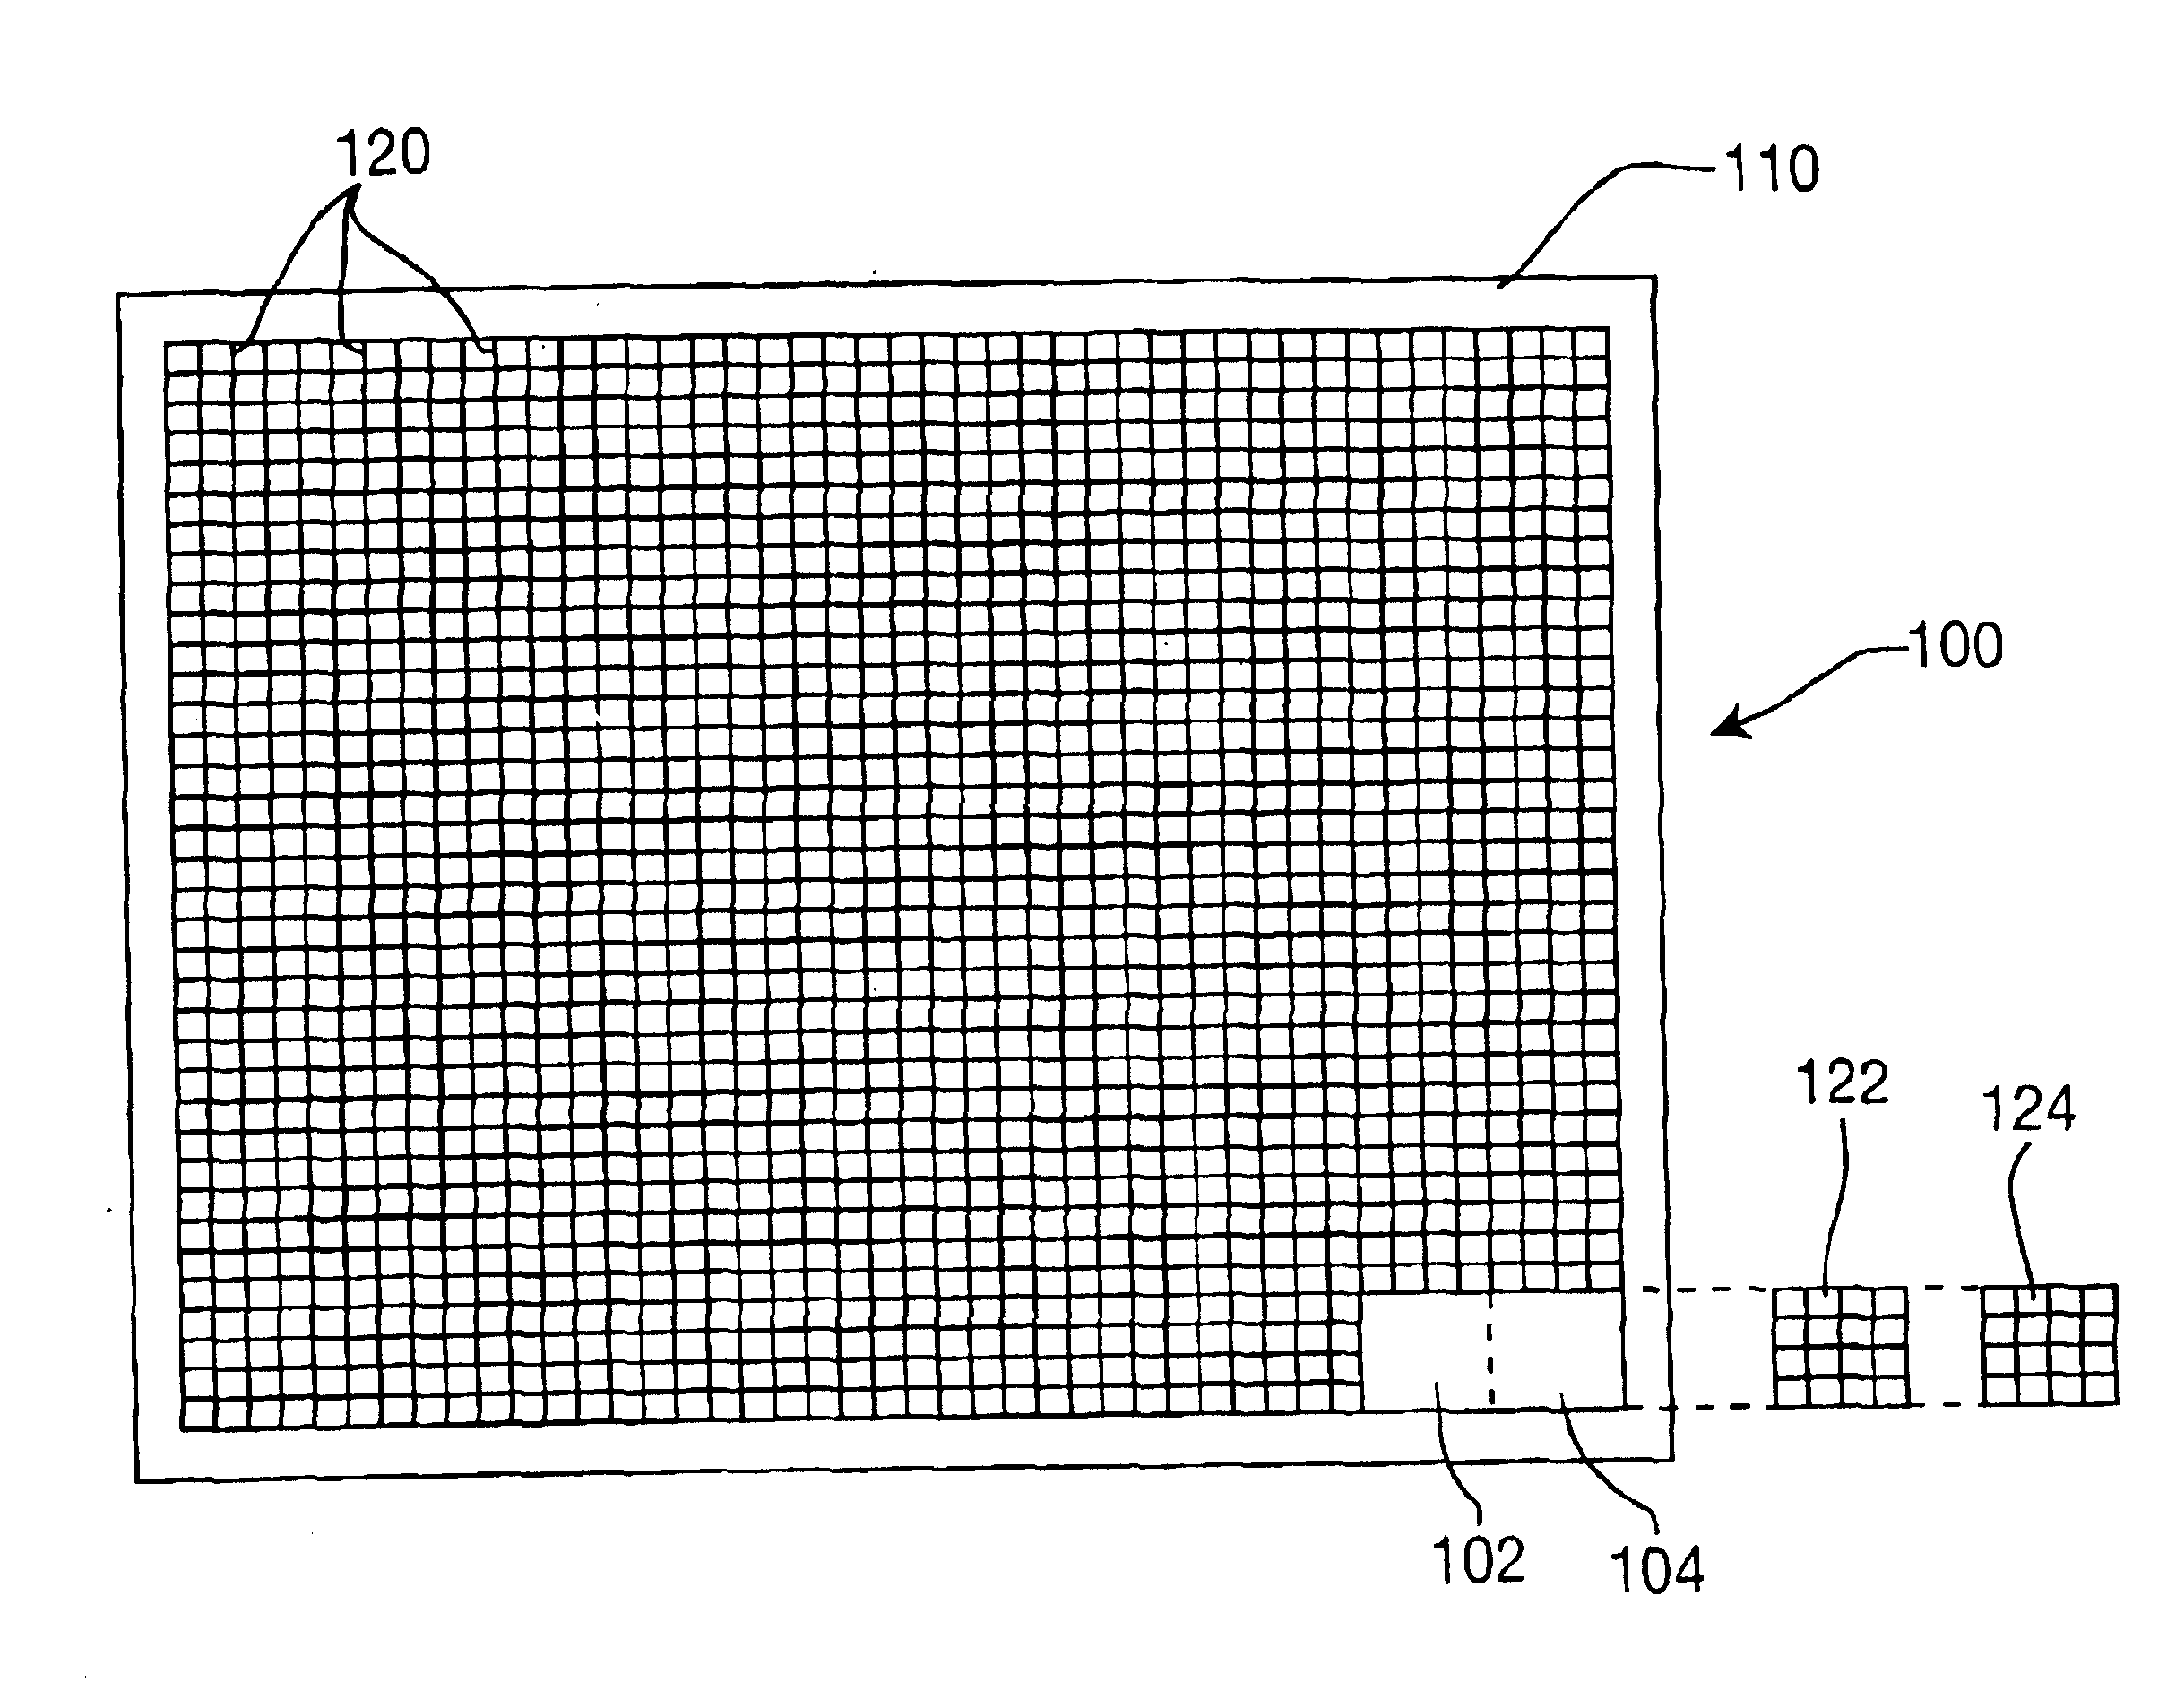 Tiled electronic display structure